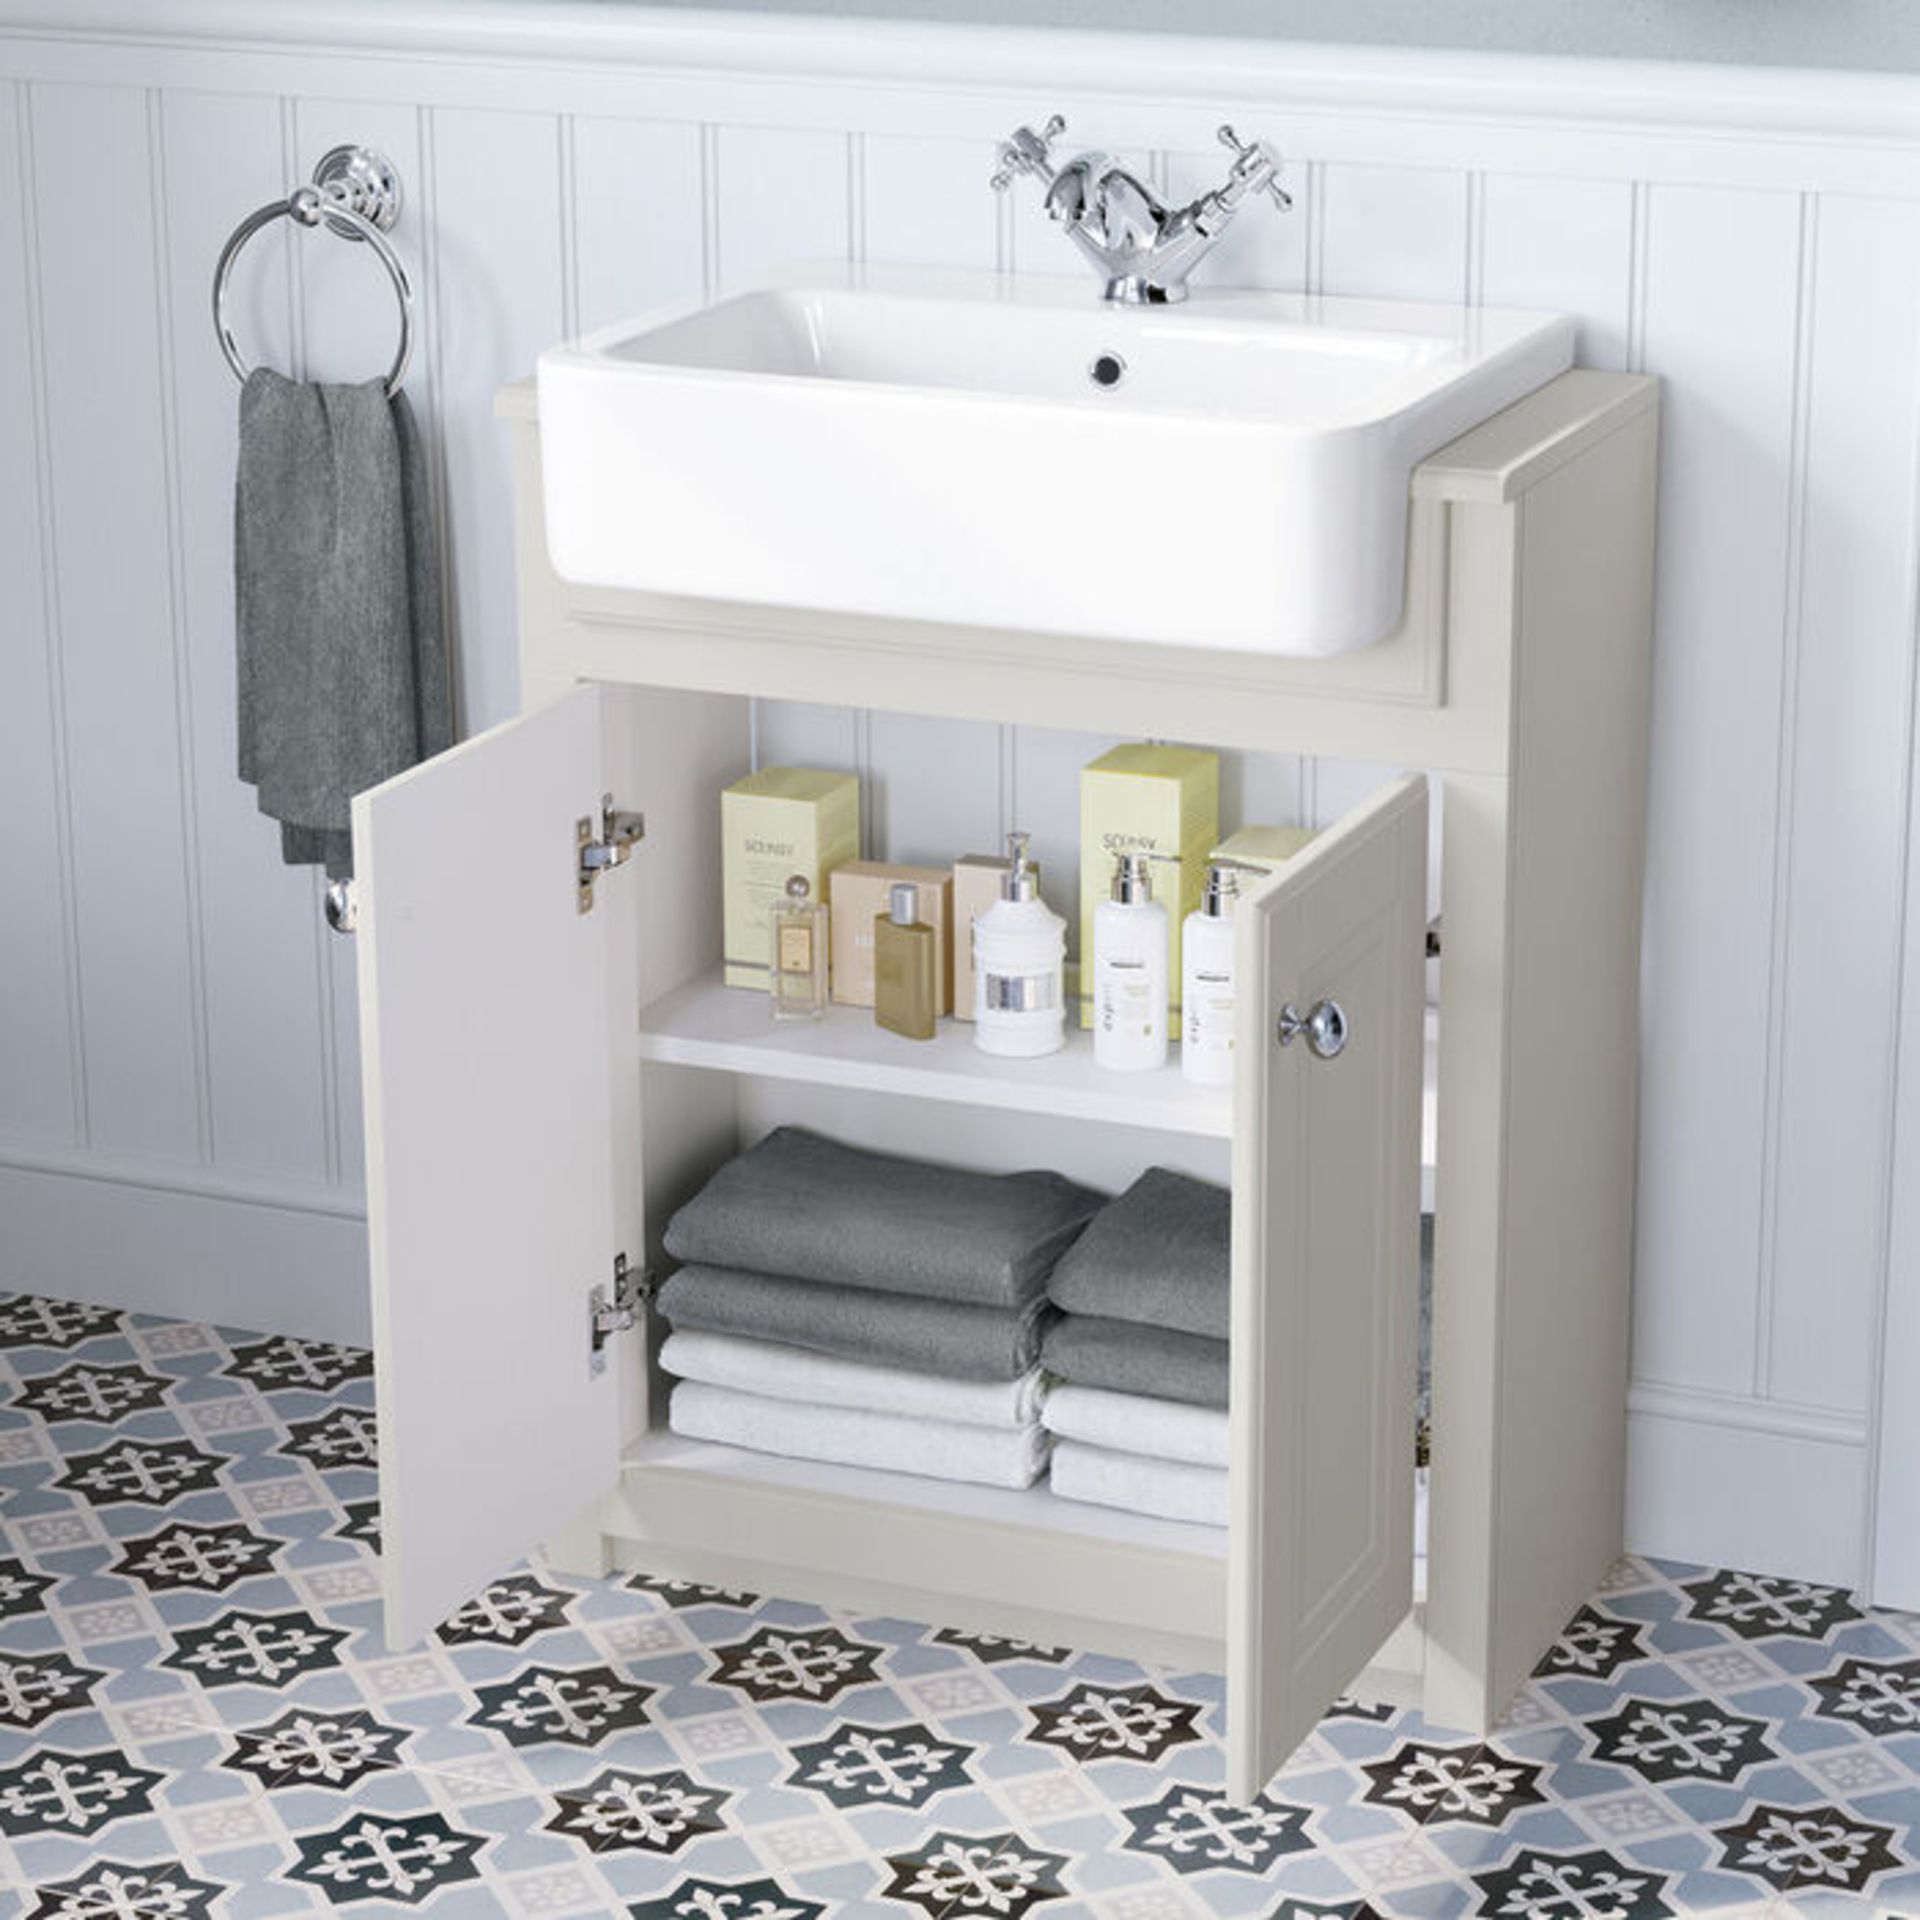 NEW & BOXED 667mm Cambridge Clotted Cream FloorStanding Sink Vanity Unit. RRP £749.99.Comes co... - Image 3 of 3